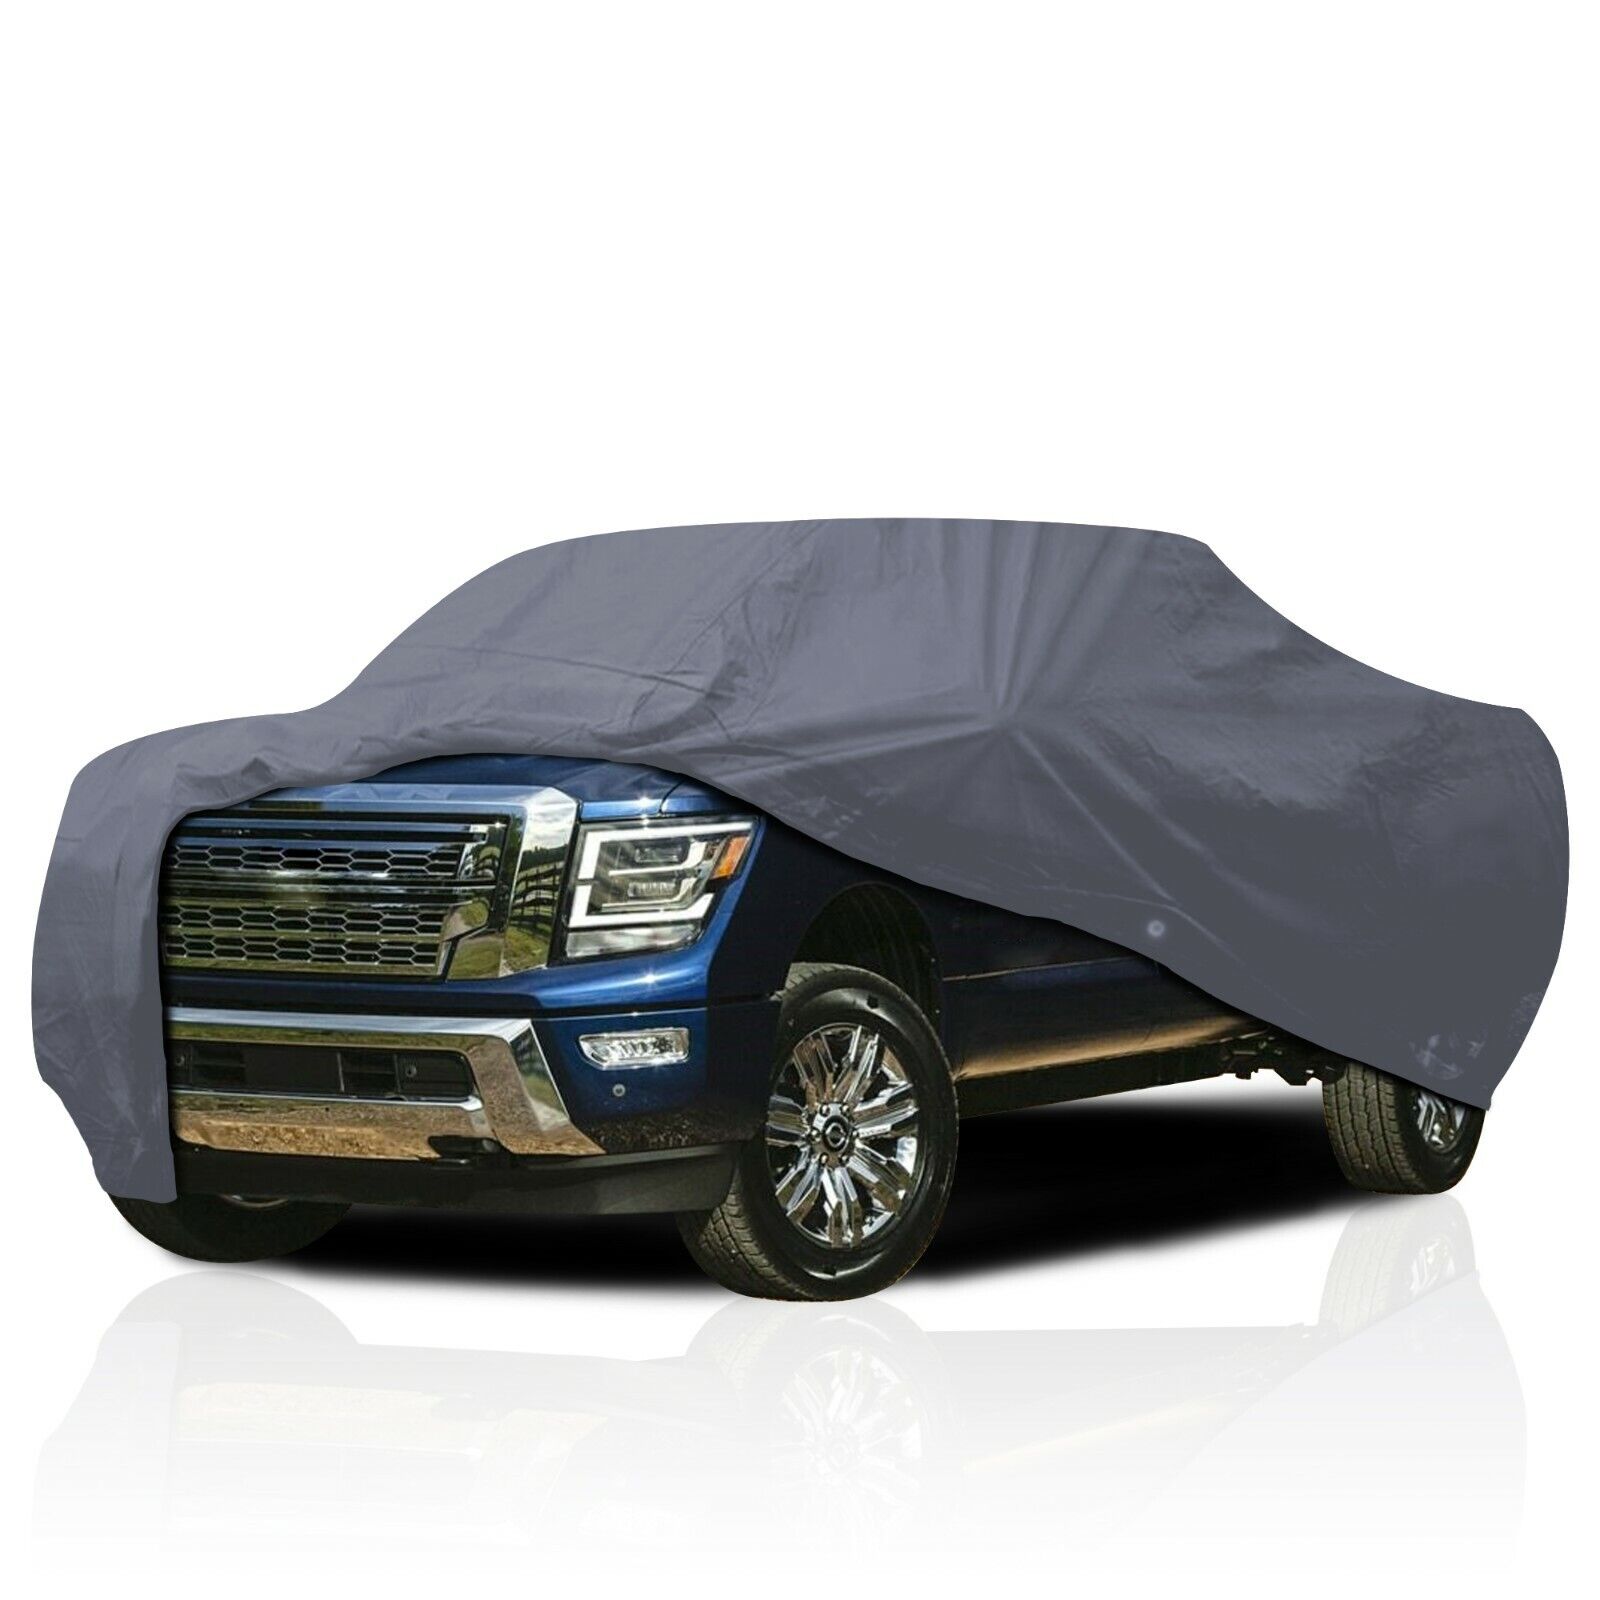 Full Truck Cover 4 Layer for Isuzu I-370 EXT Cab Short Bed 2007 2008 | eBay